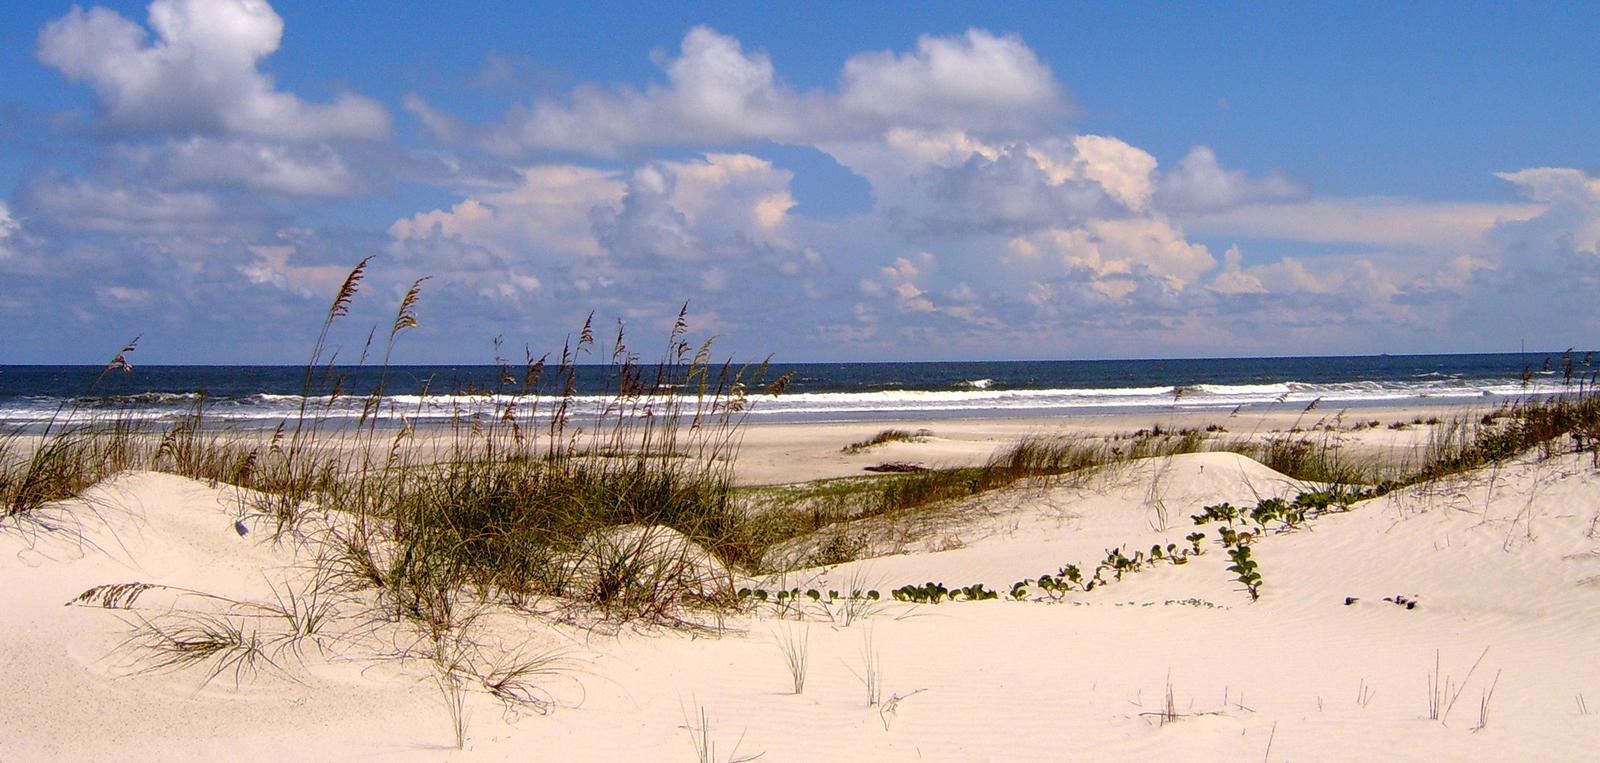 undeveloped beach complete with sea oat covered dunes, light sands, blue sky, and crashing wavesCumberland Island is home to 17 miles of undeveloped beach offering excellent opportunities for beach combing, swimming, photography, and solitude. 